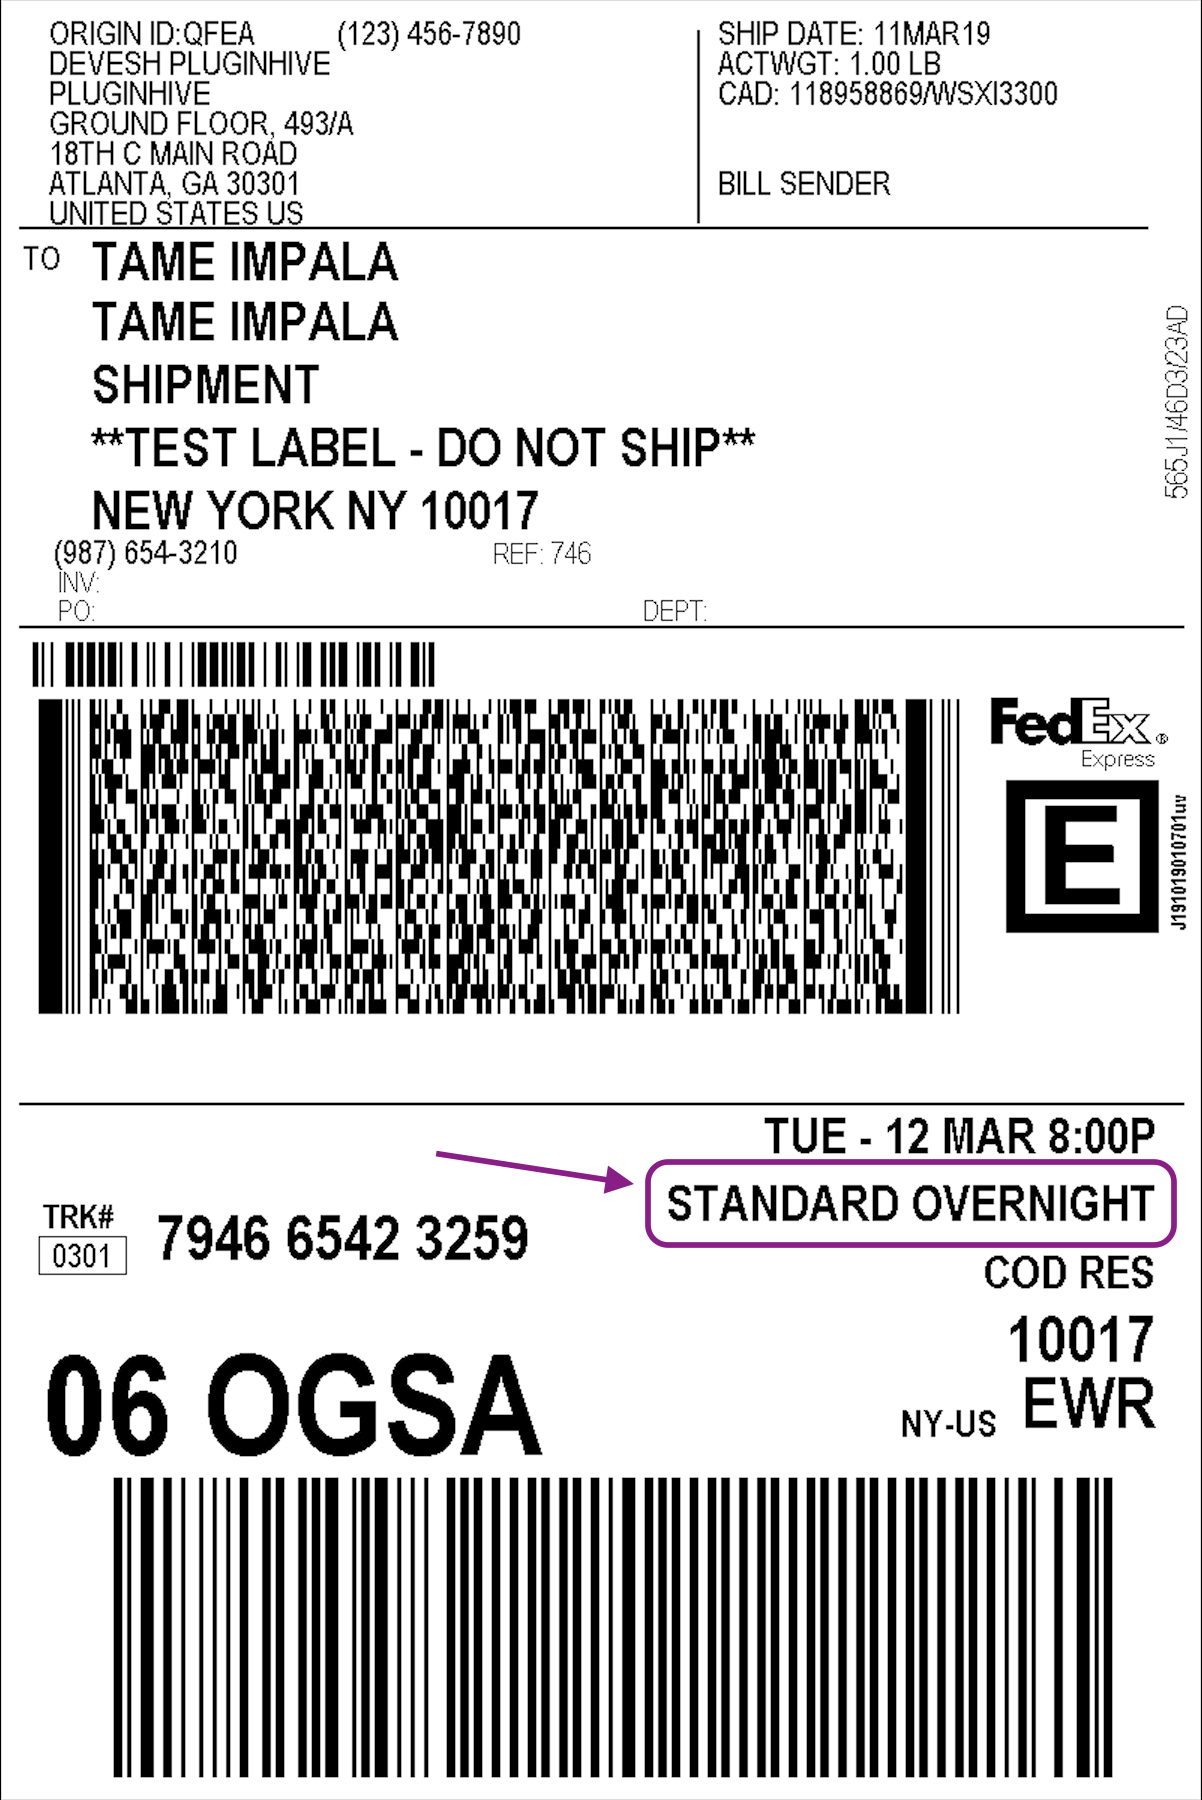 is-fedex-standard-overnight-a-better-choice-for-your-woocommerce-pluginhive